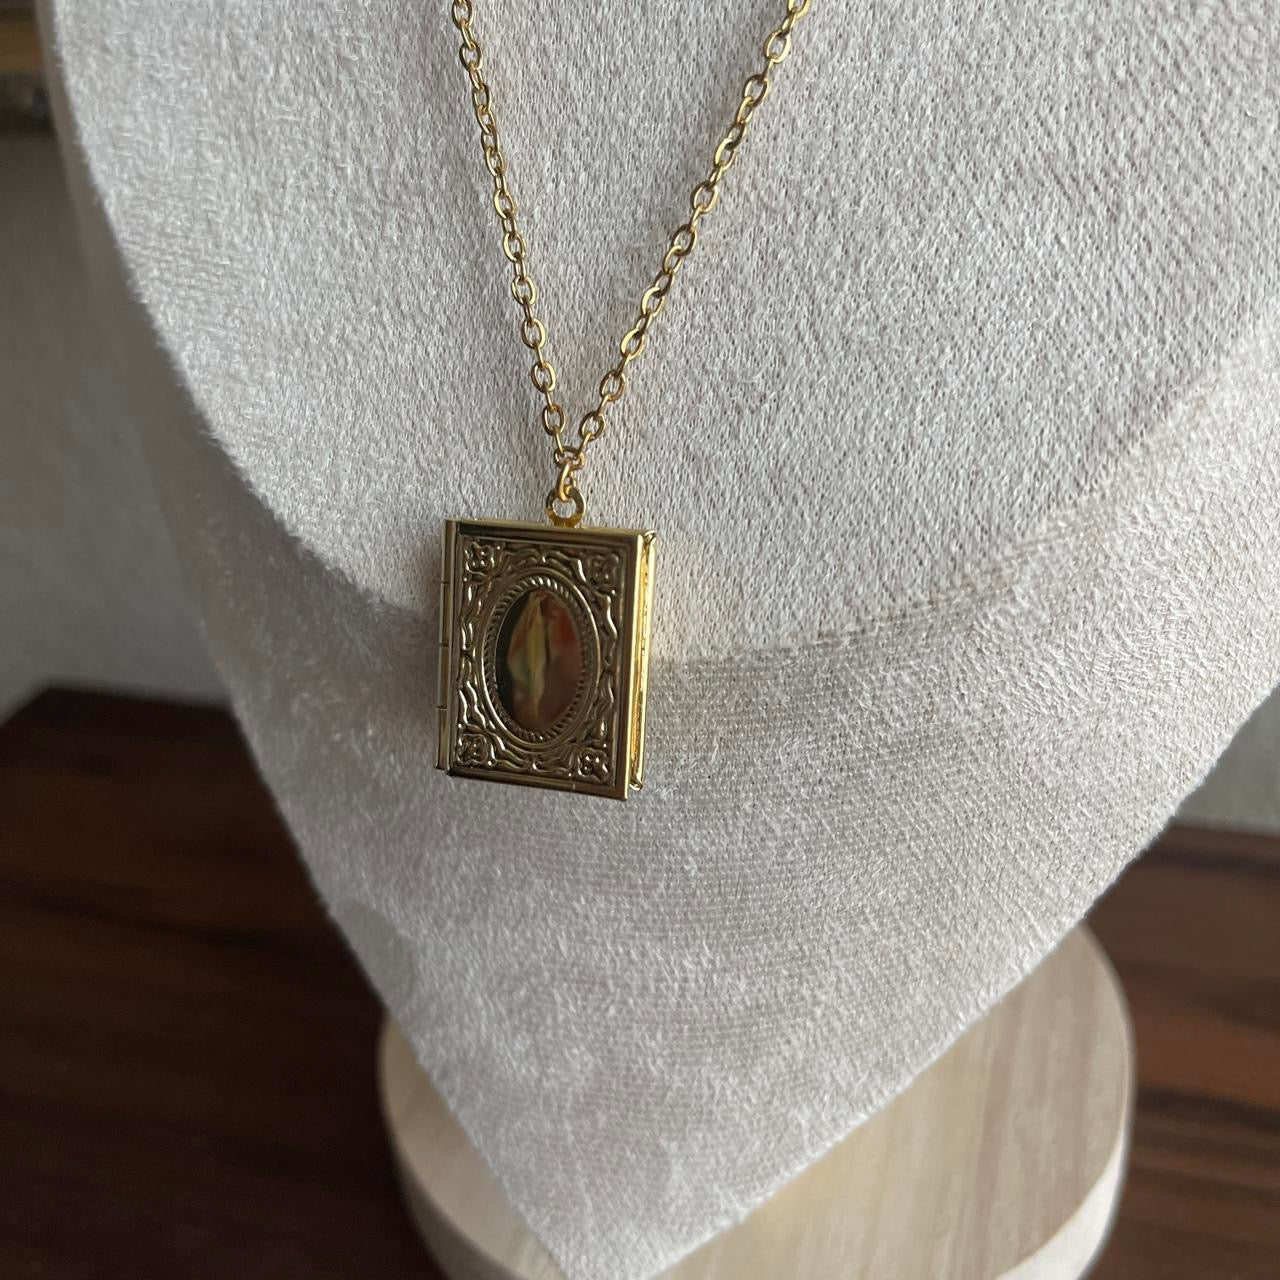 Vintage style gold tone book locket necklace